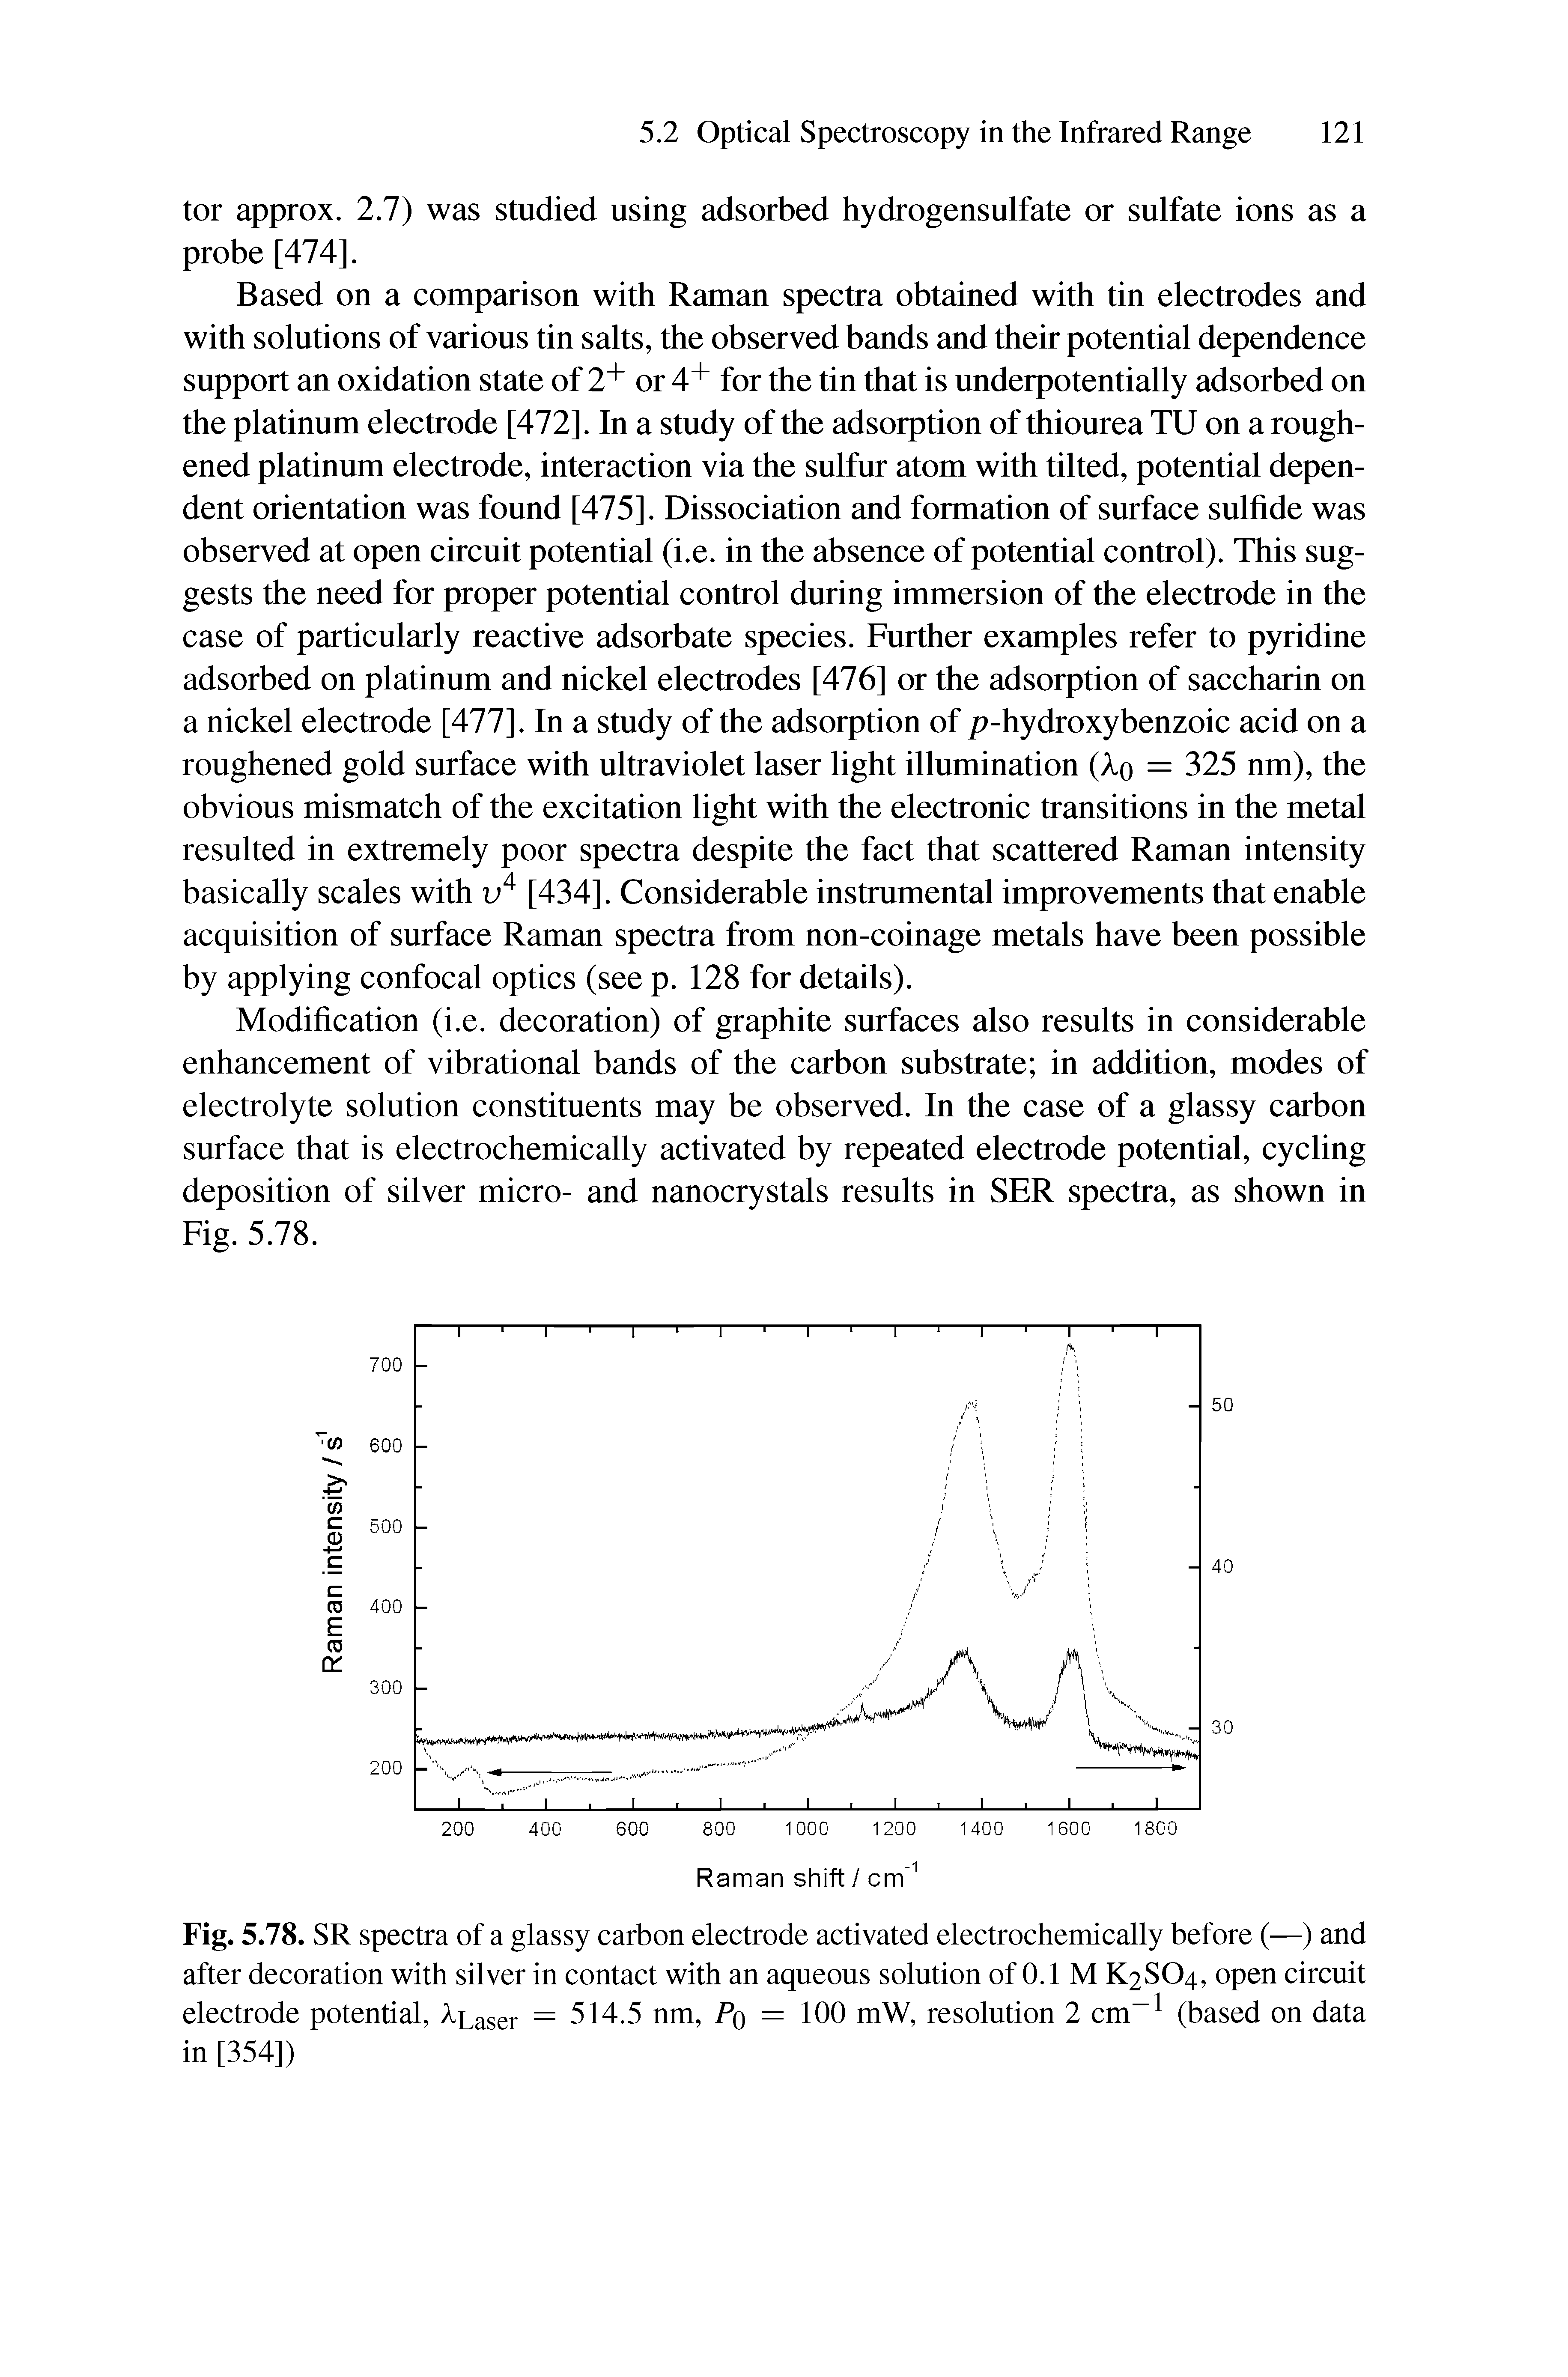 Fig. 5.78. SR spectra of a glassy carbon electrode activated electrochemically before (—) and after decoration with silver in contact with an aqueous solution of 0.1 M K2SO4, open circuit electrode potential, Laser = 514.5 nm, Pq = 100 mW, resolution 2 cm" (based on data in [354])...